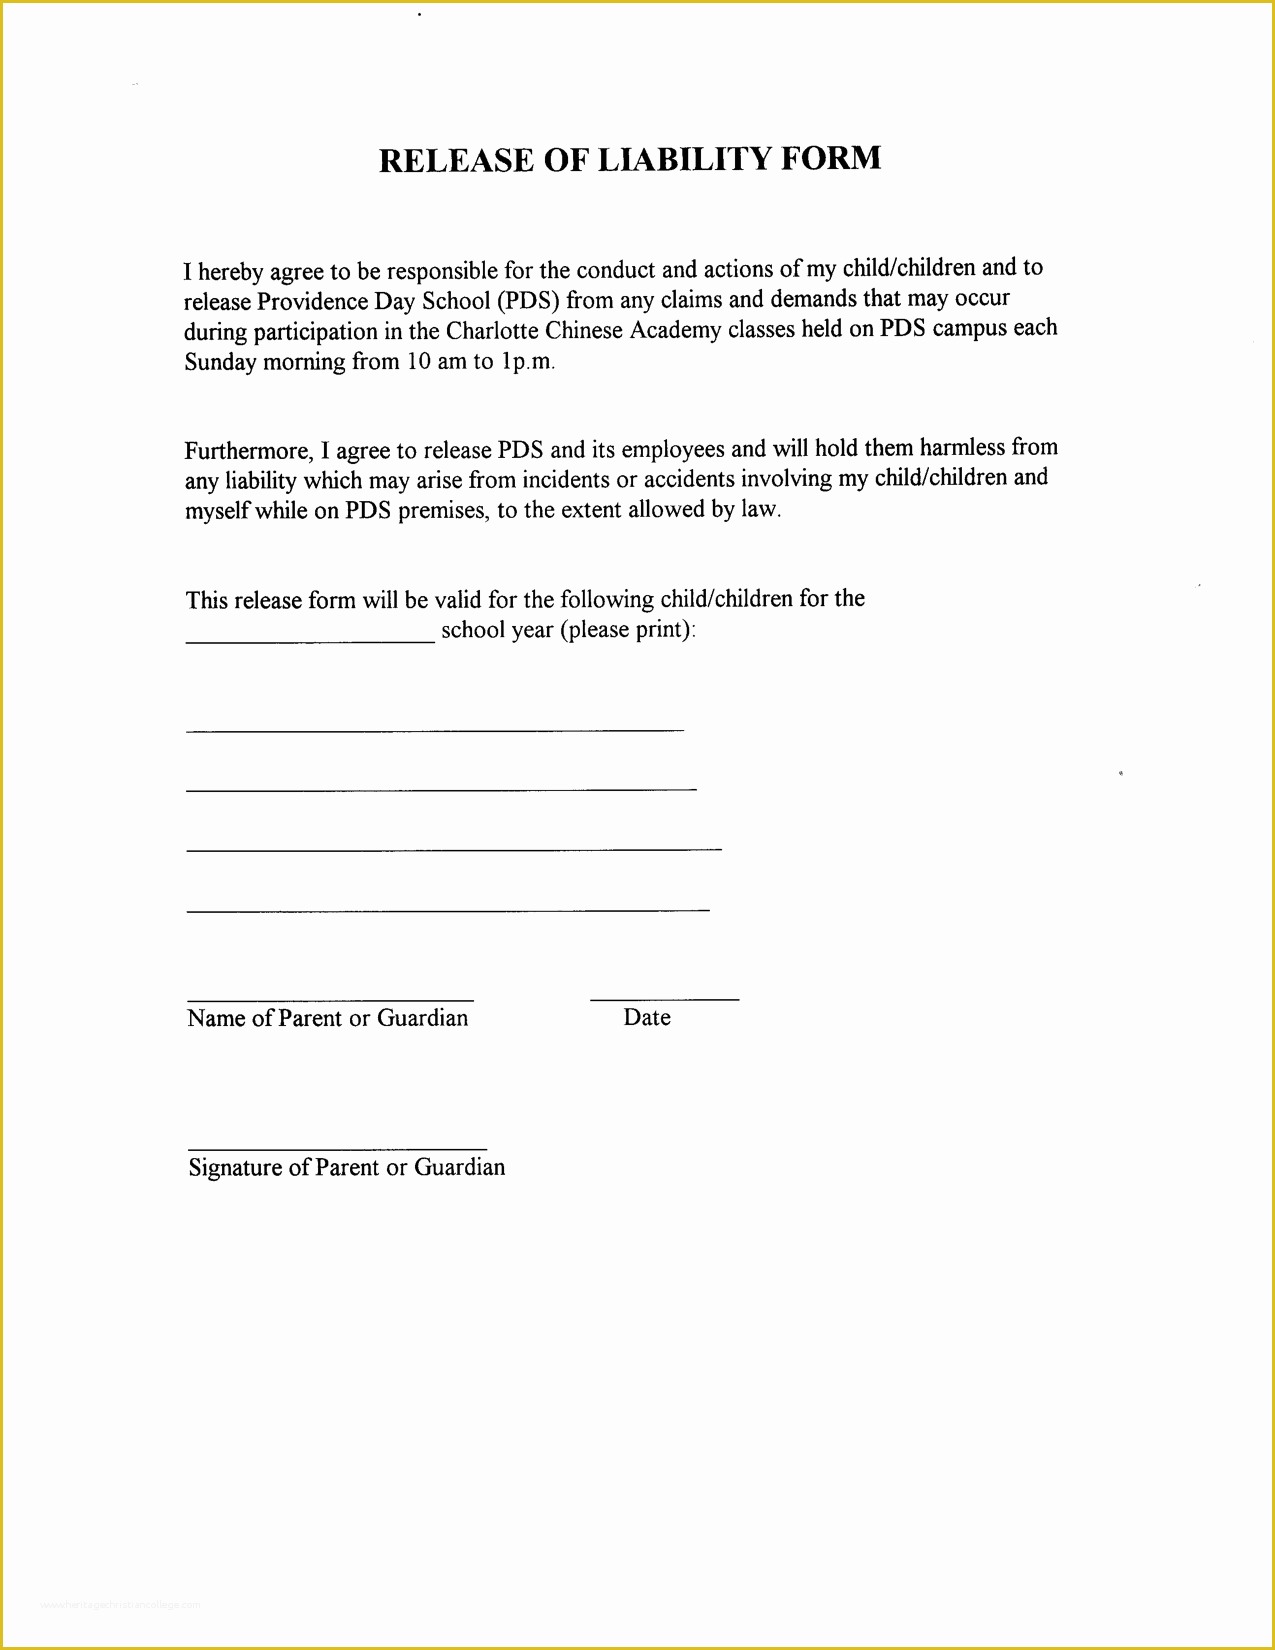 Release Of Liability Template Free Of Liability Release form Template In Images Release Of